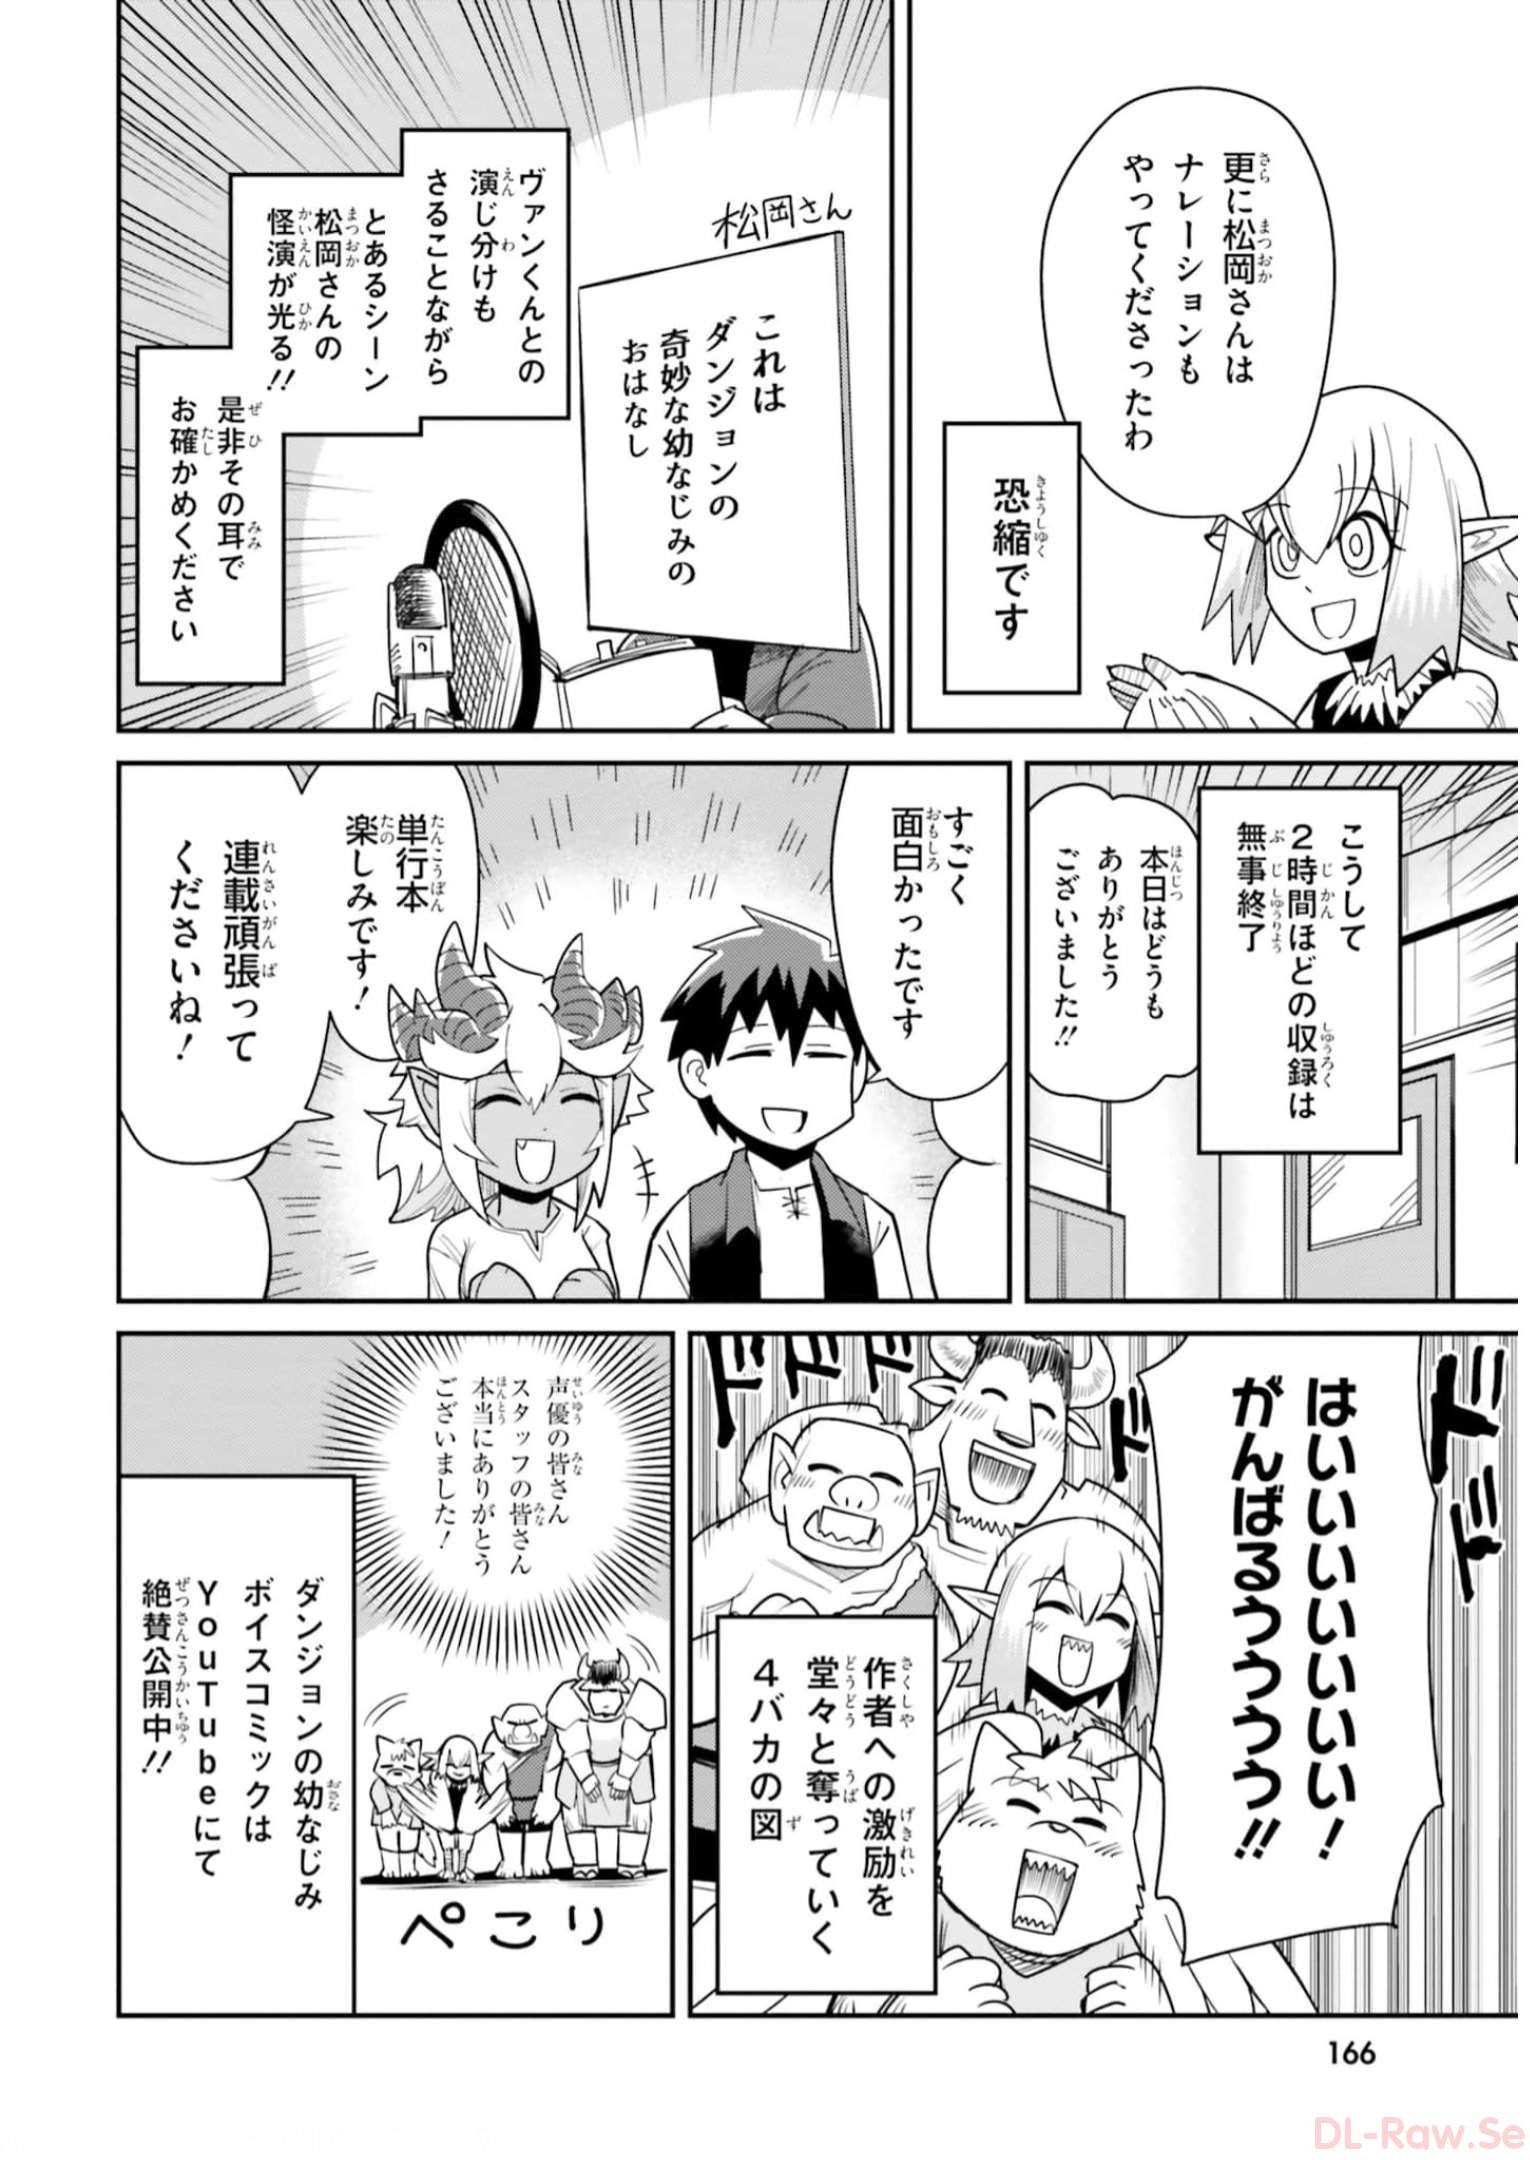 Dungeon Friends Forever Dungeon's Childhood Friend ダンジョンの幼なじみ 第18.2話 - Page 4